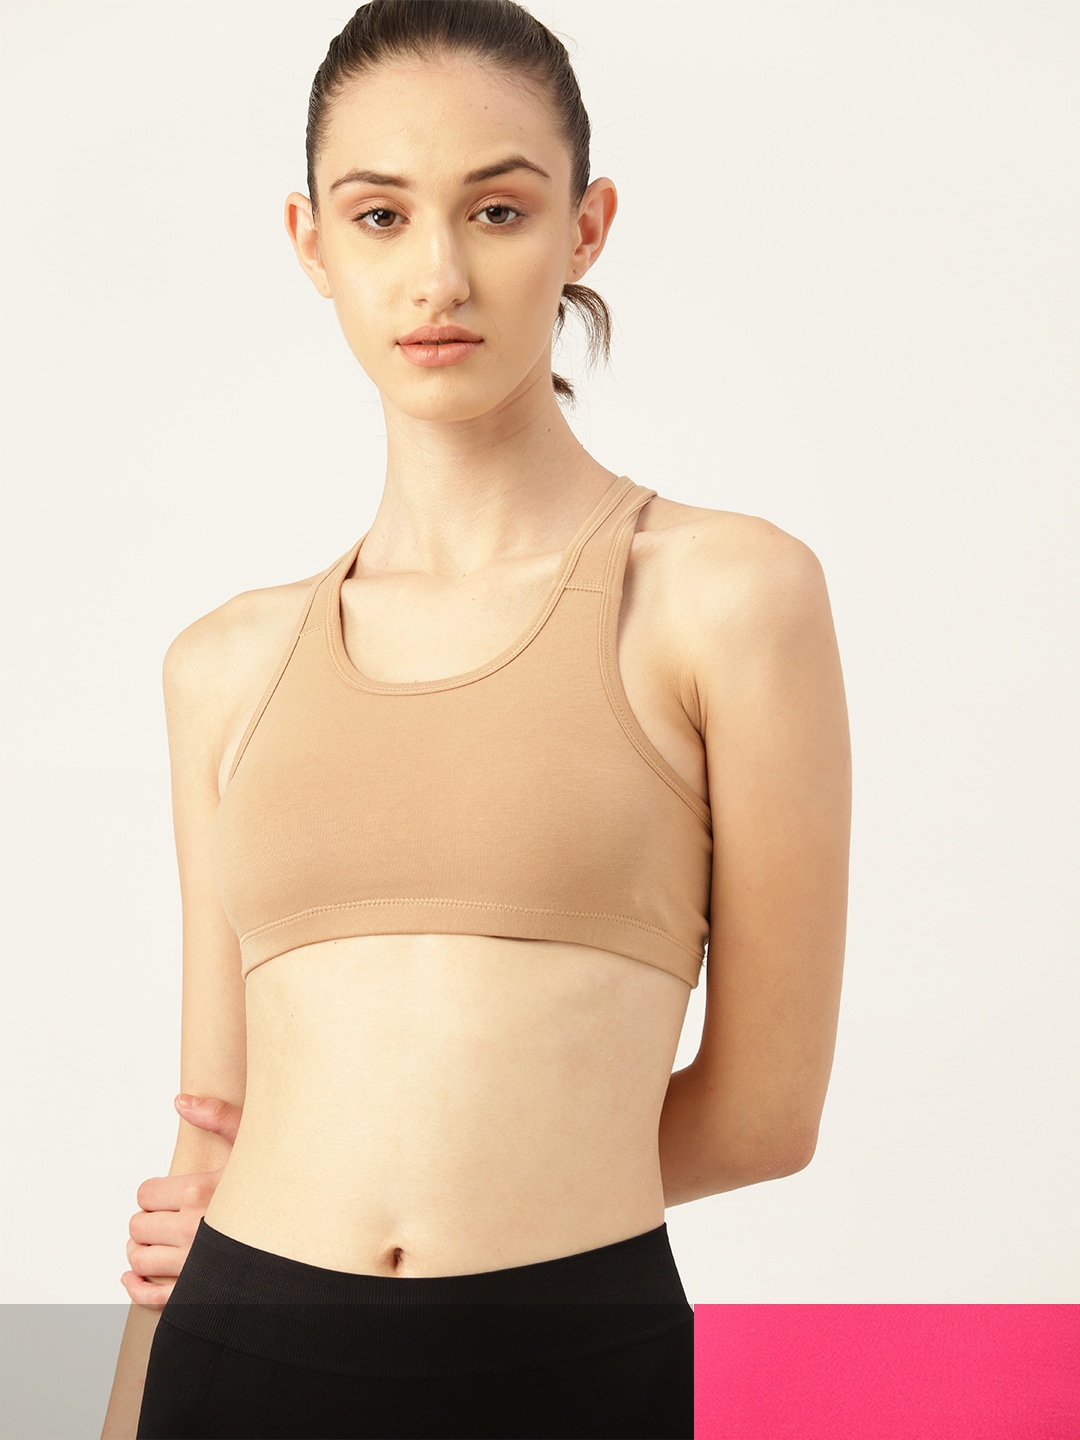 SAVE ₹770 on DressBerry Pack of 2 Solid Non-Padded Sports Bras